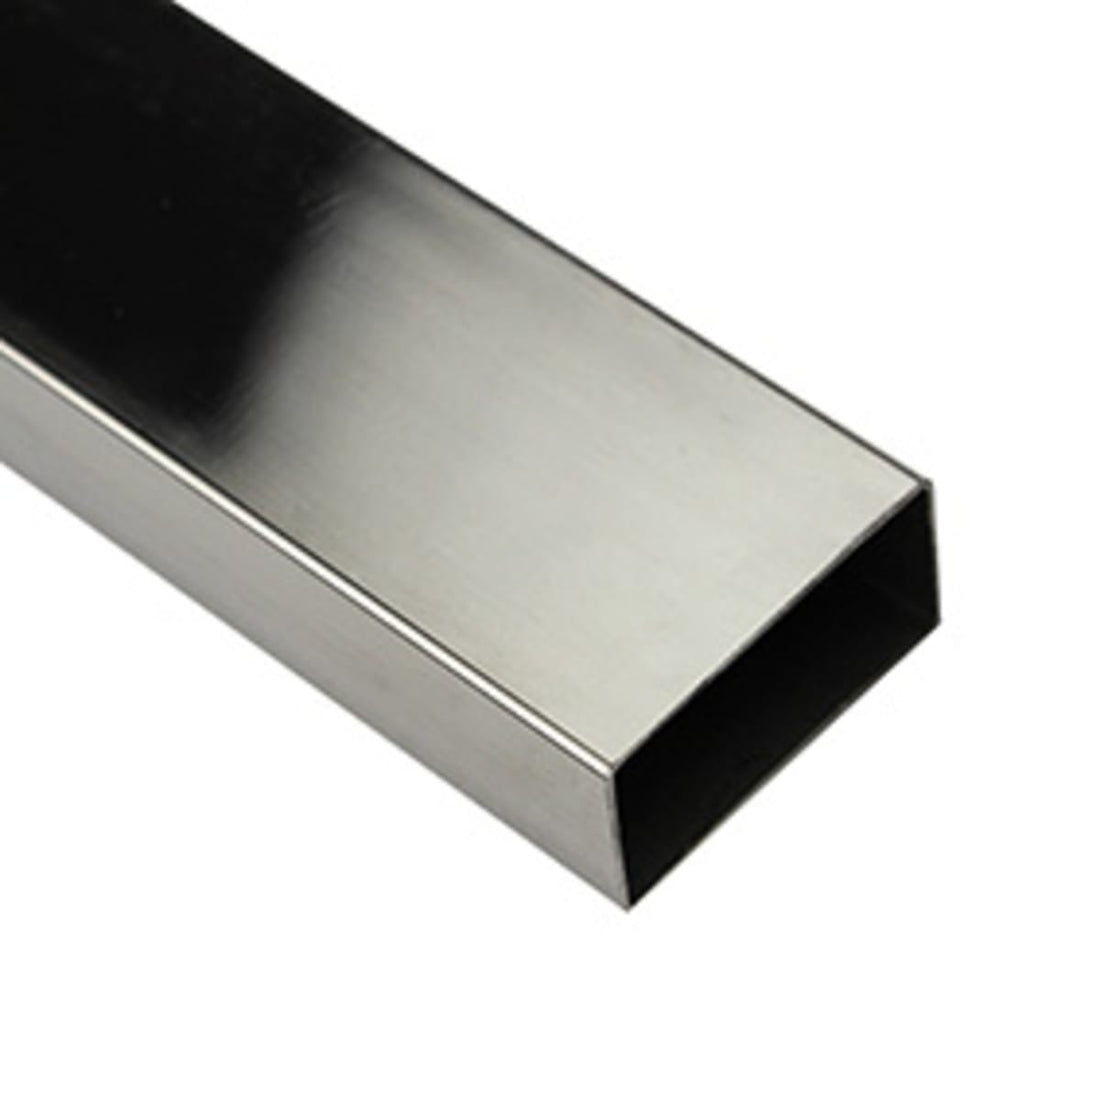 RECTANGULAR PROFILE 30X15X0.5MM 2MT STAINLESS STEEL AISI 304